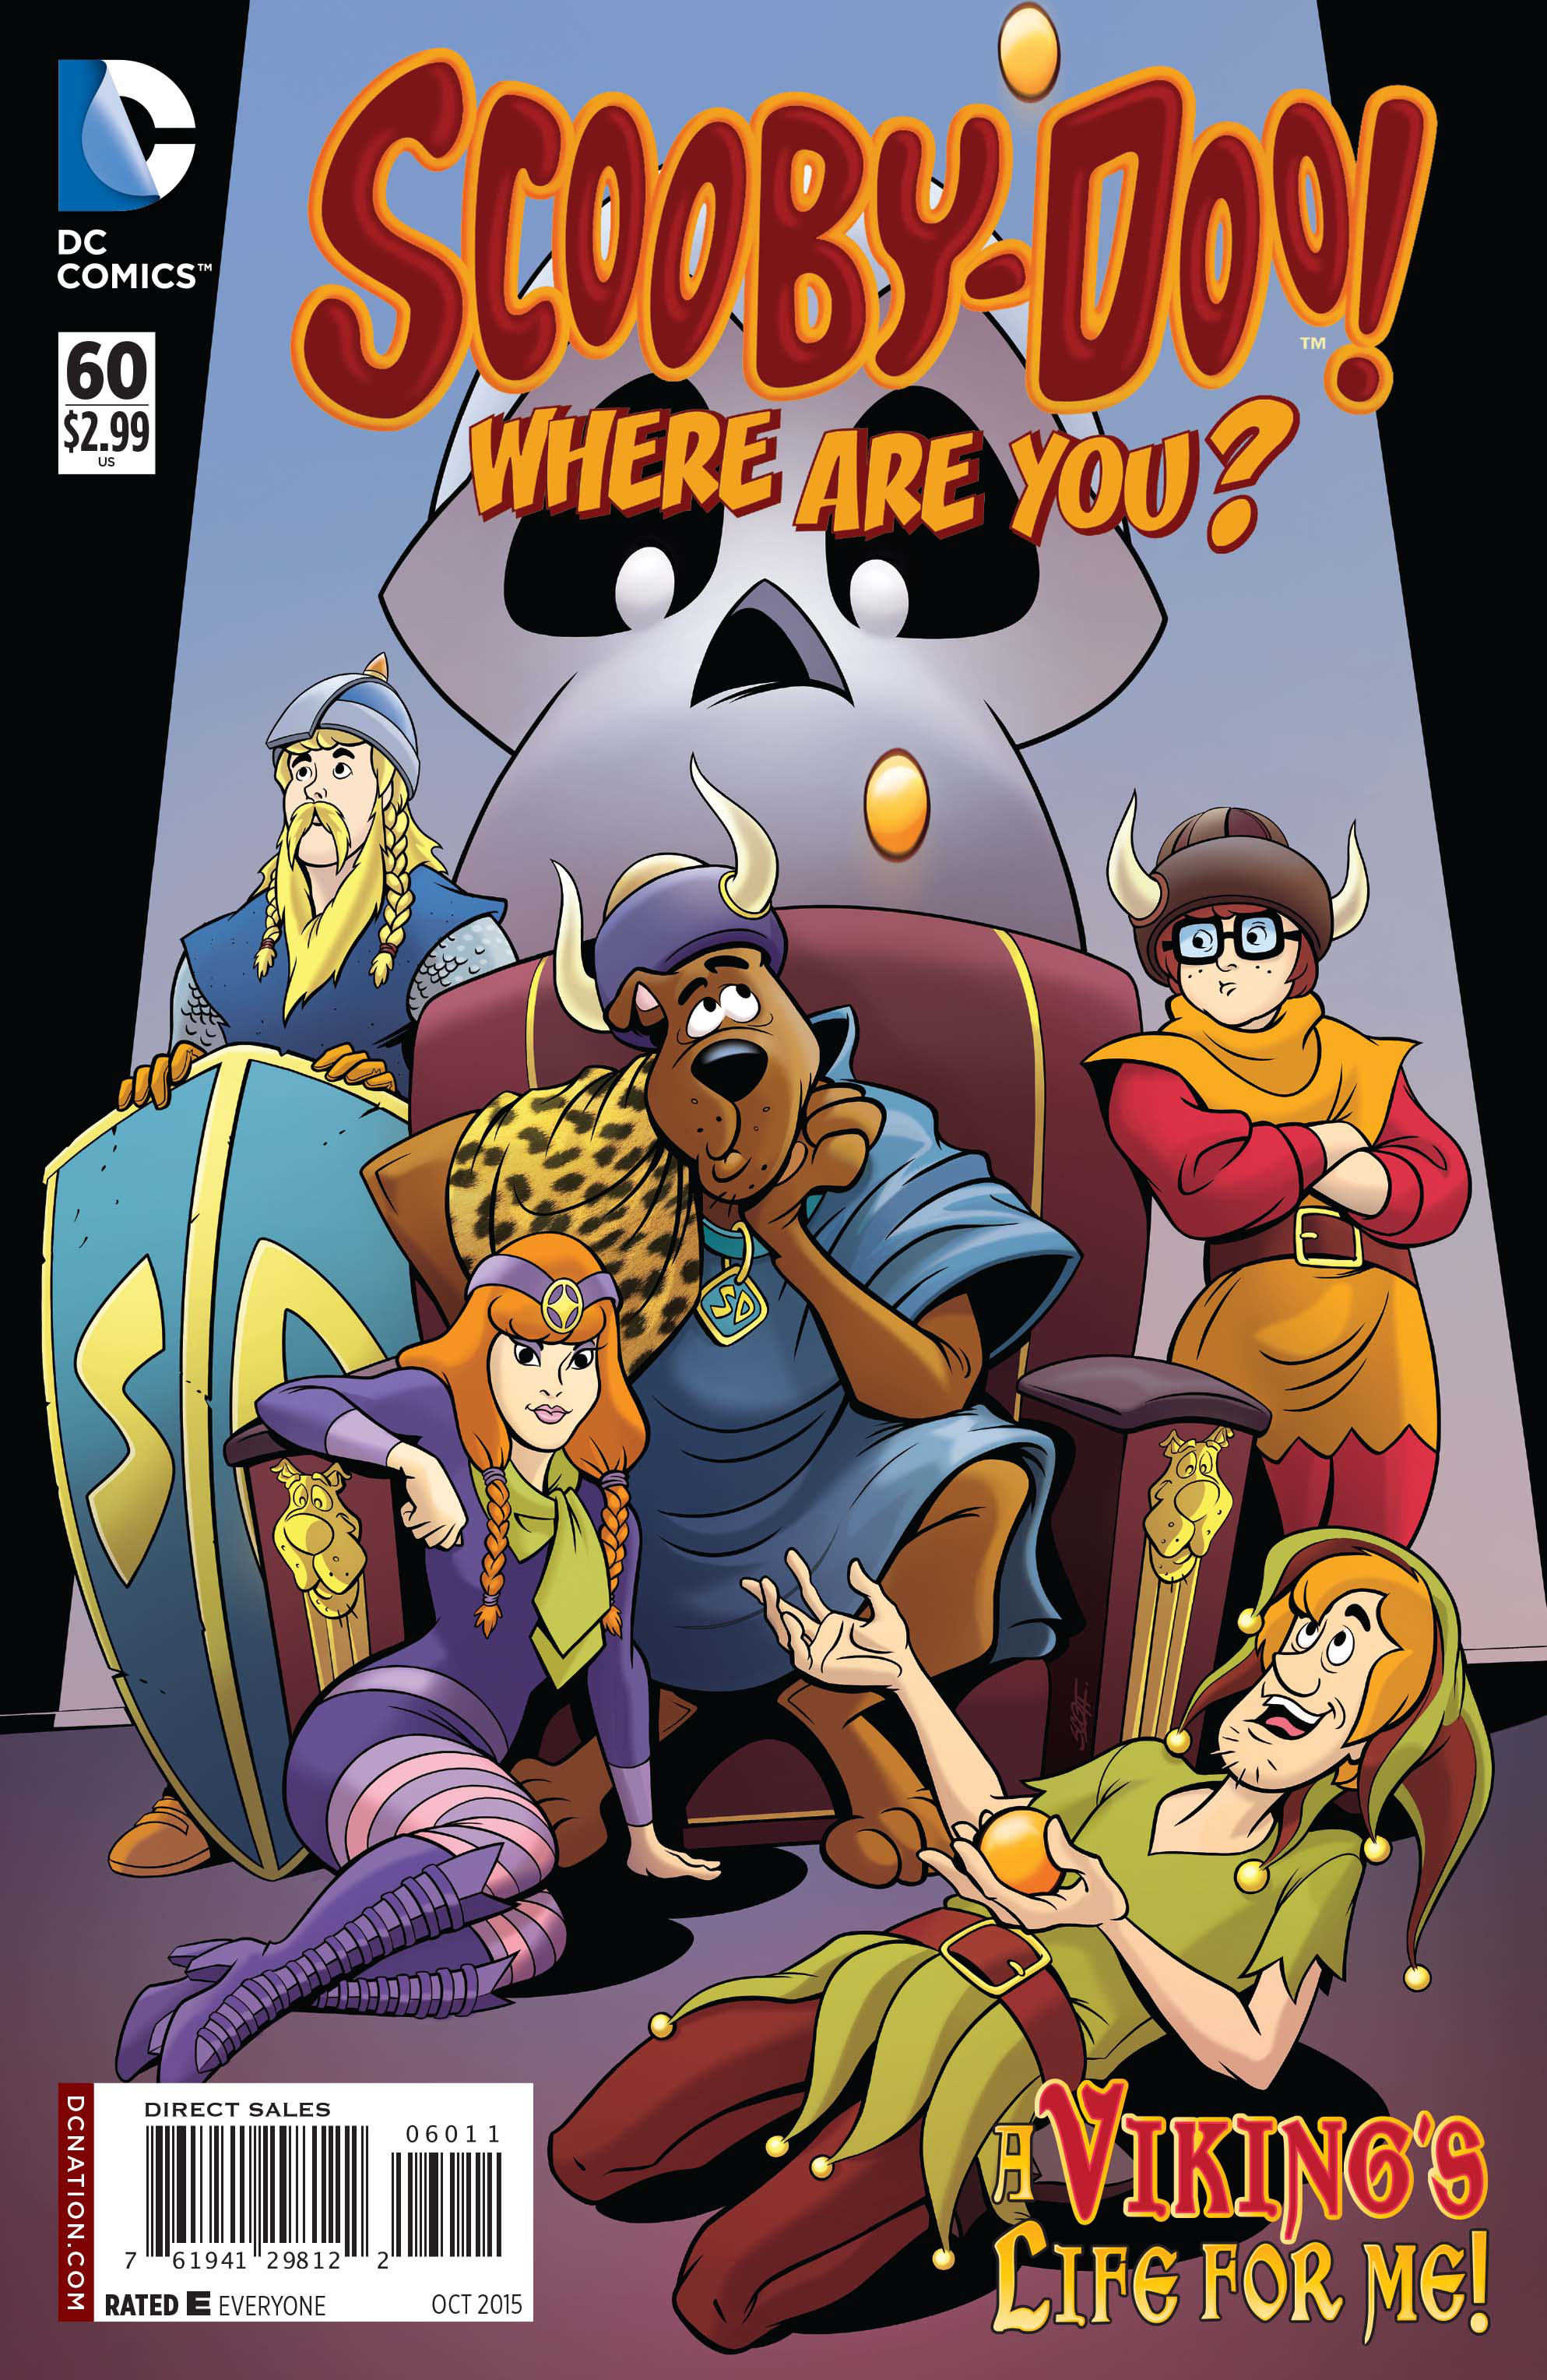 SCOOBY DOO WHERE ARE YOU #60